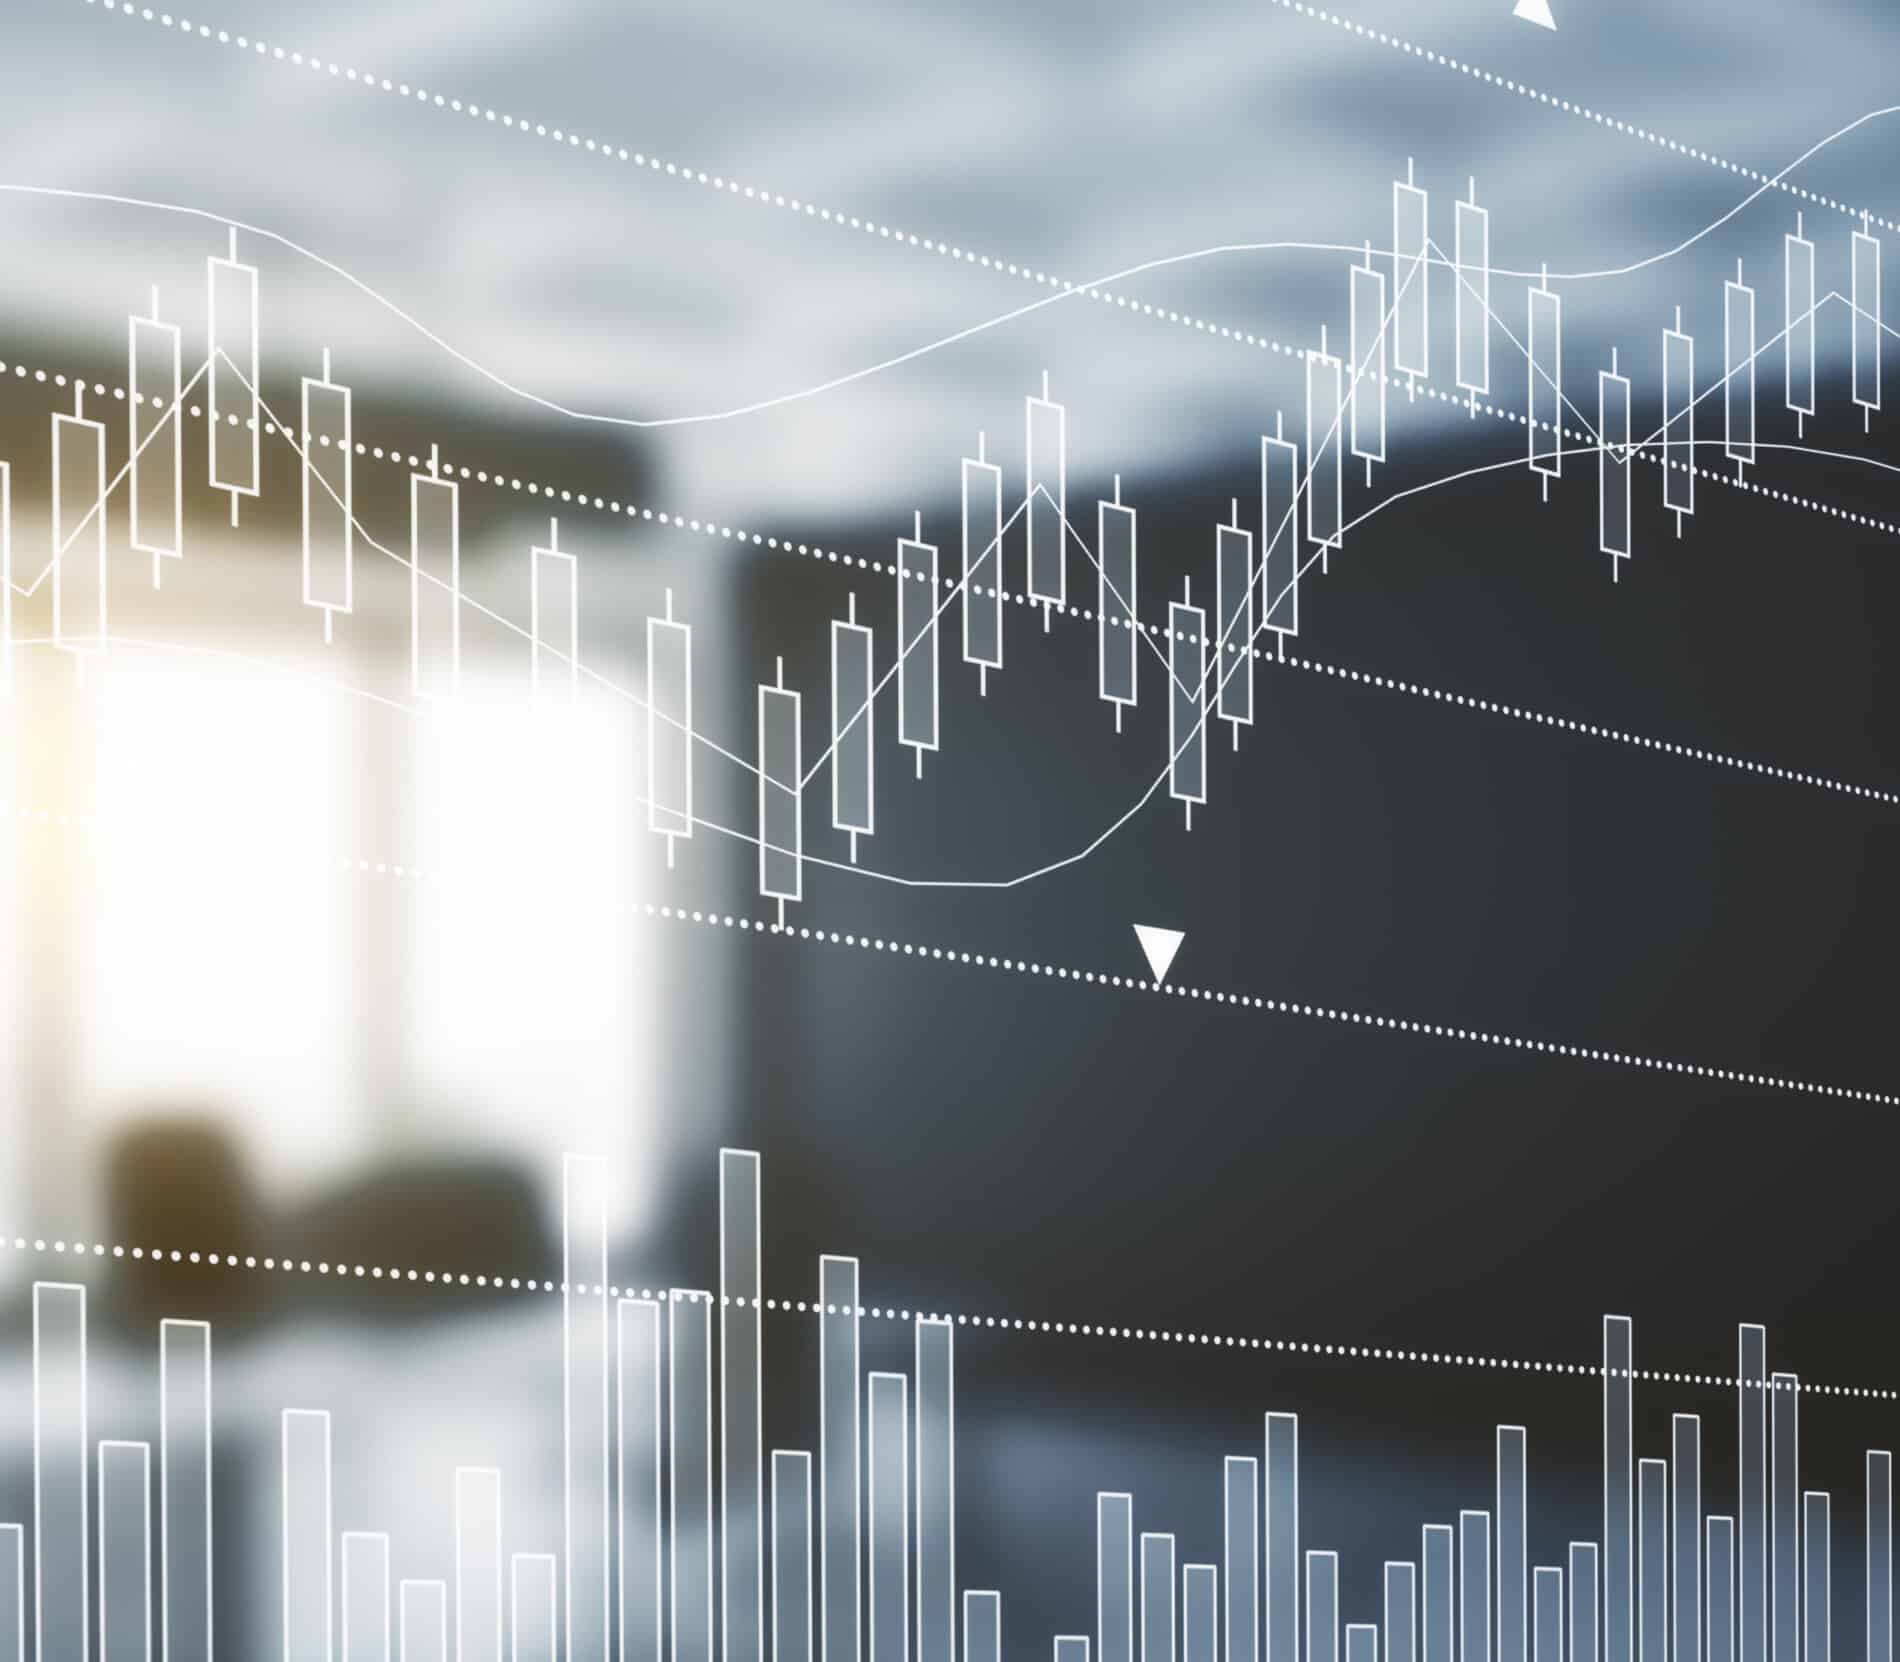 Abstract blurry office interior with forex chart.